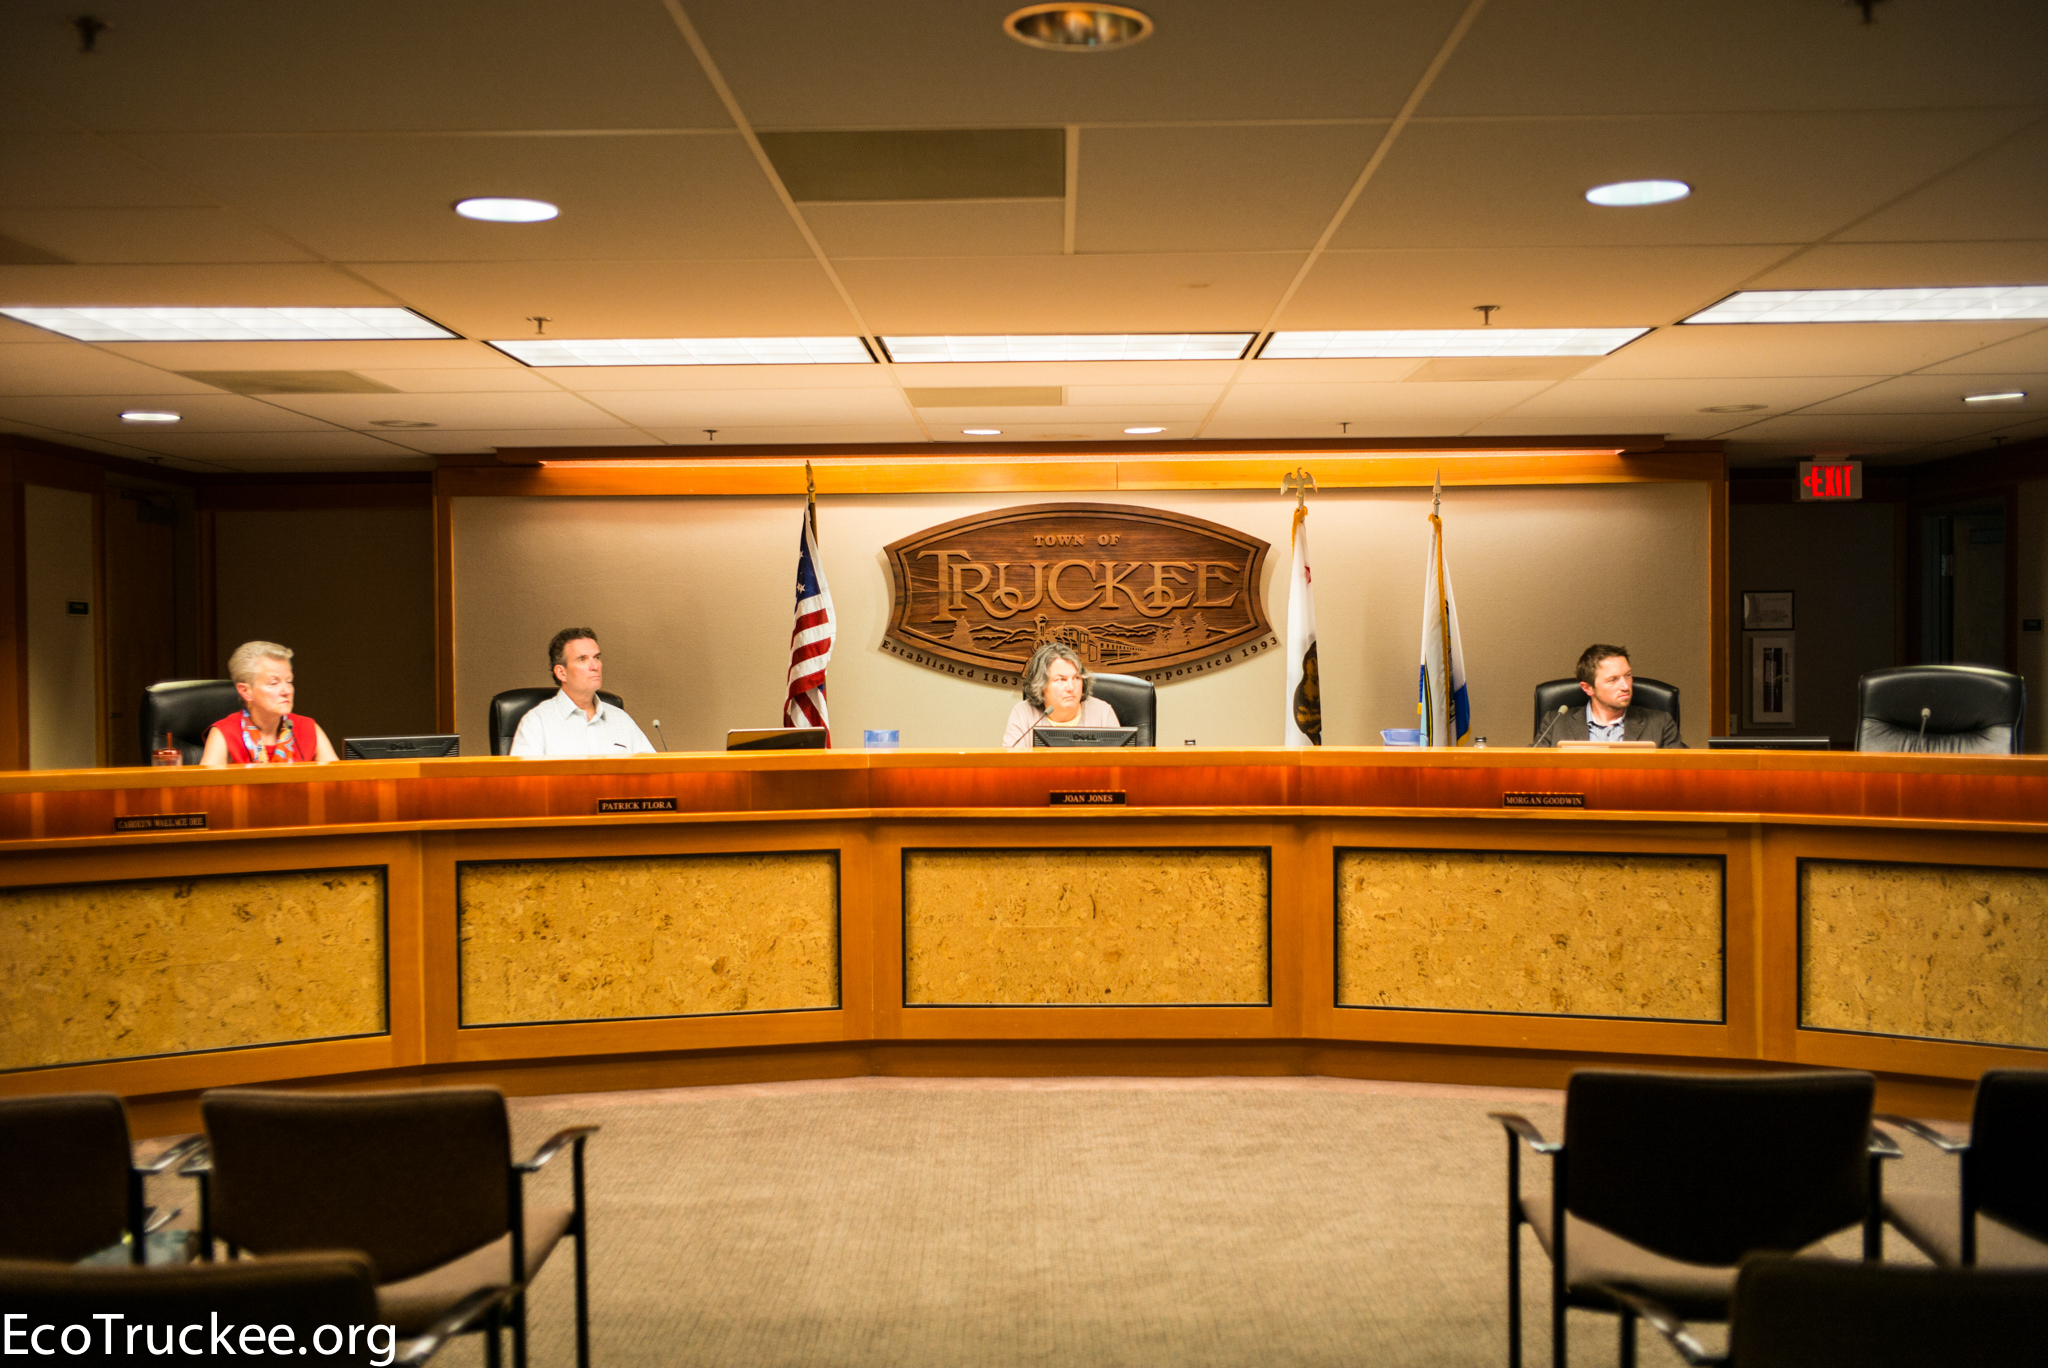 July 14, 2015 Town of Truckee Council Meeting